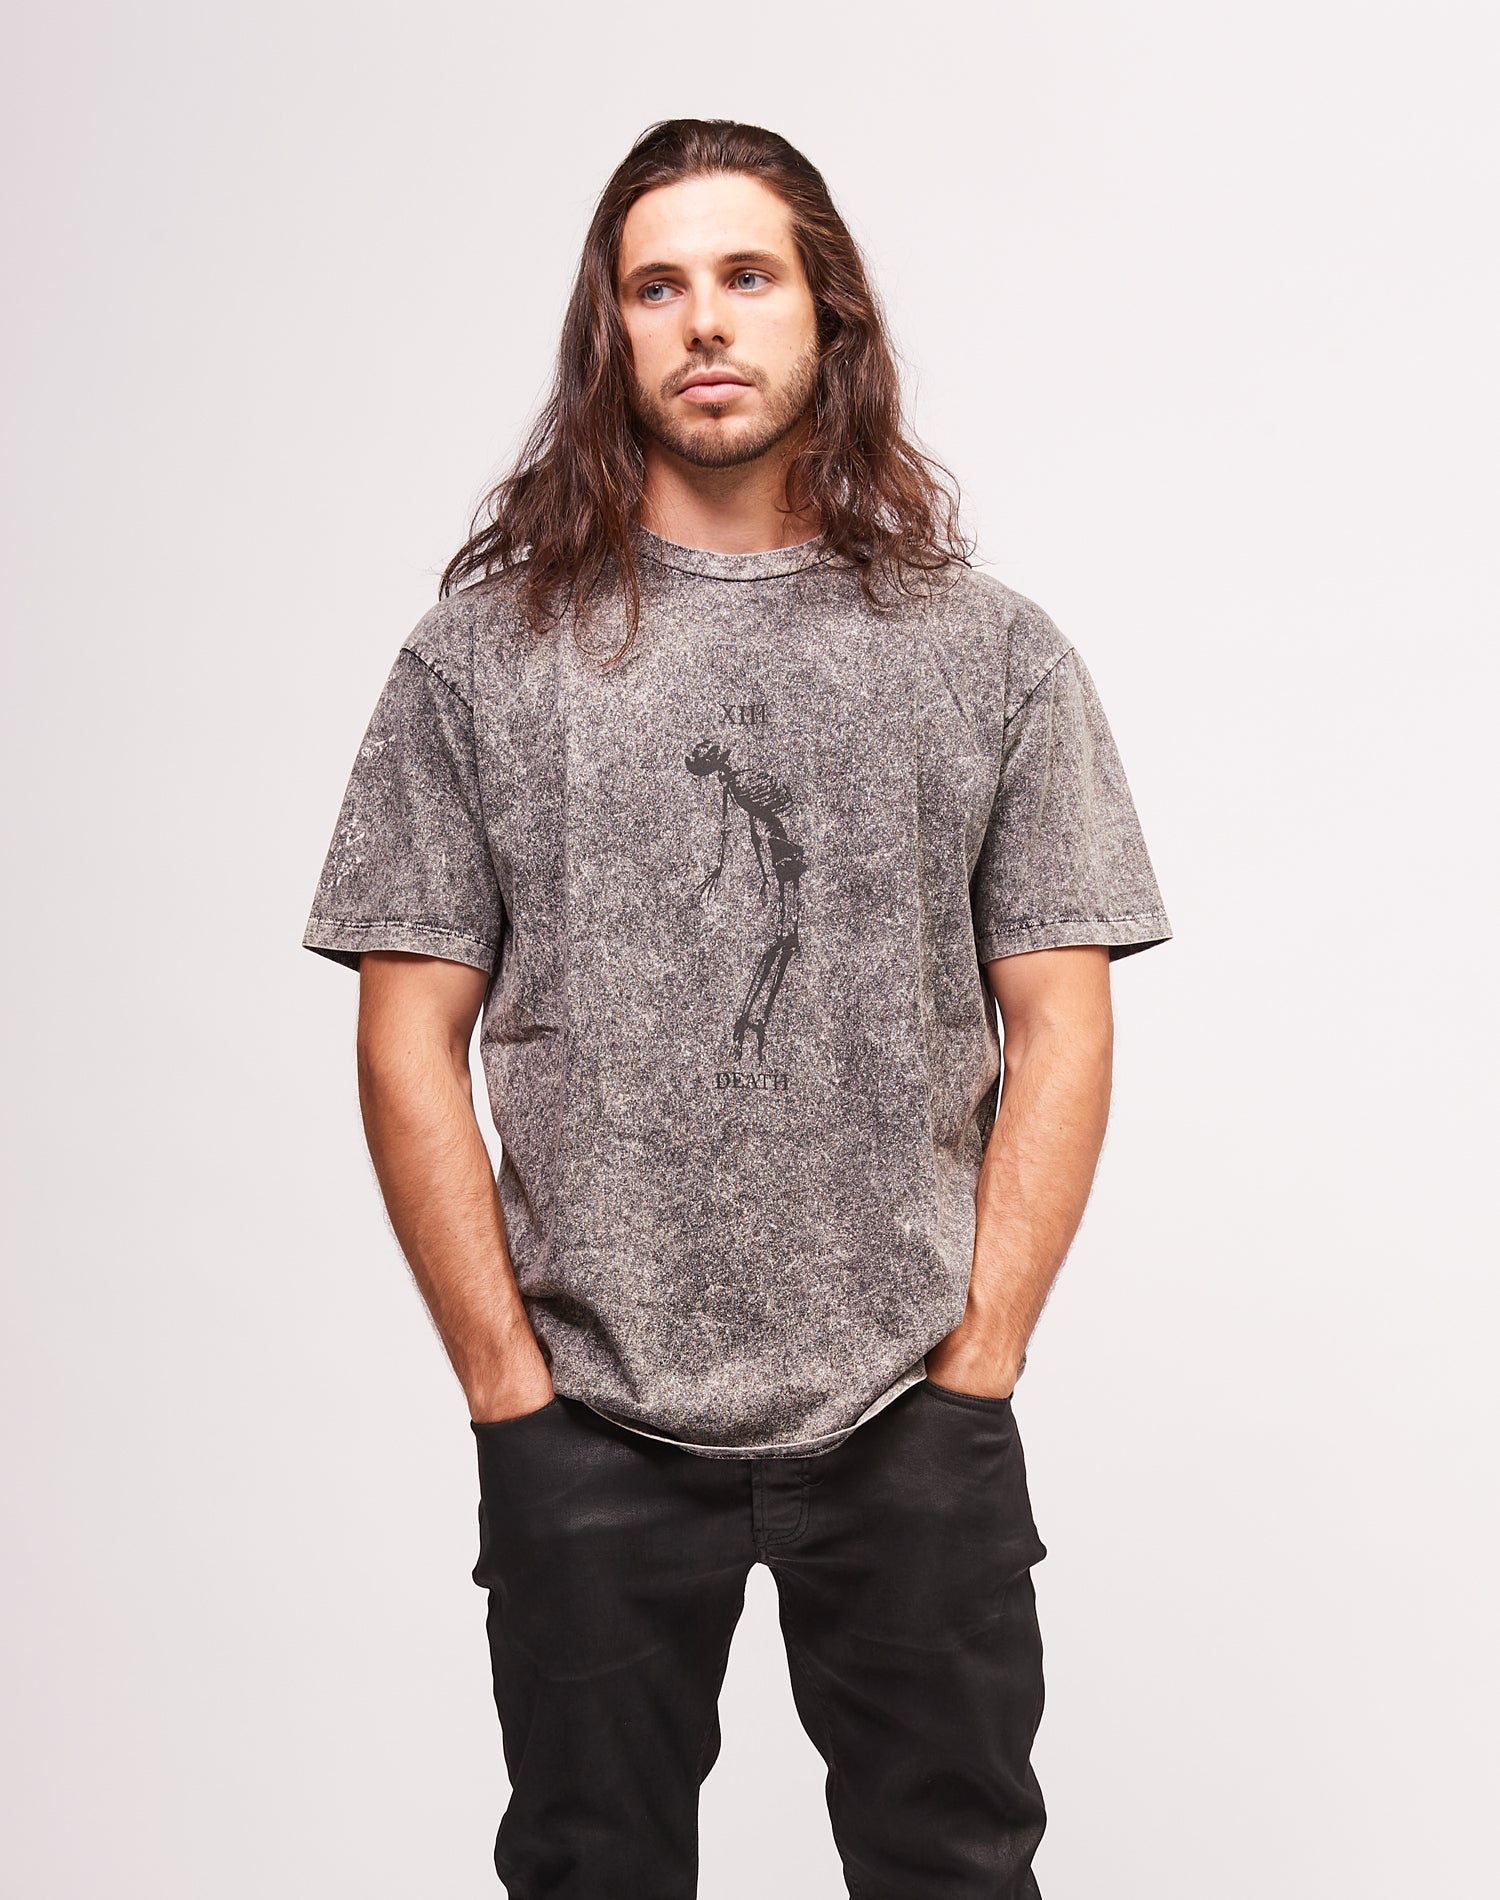 SKULL MAN T-SHIRT Crew neck grey t shirt with frontal print. 100% cotton. Made in Italy. HTC LOS ANGELES